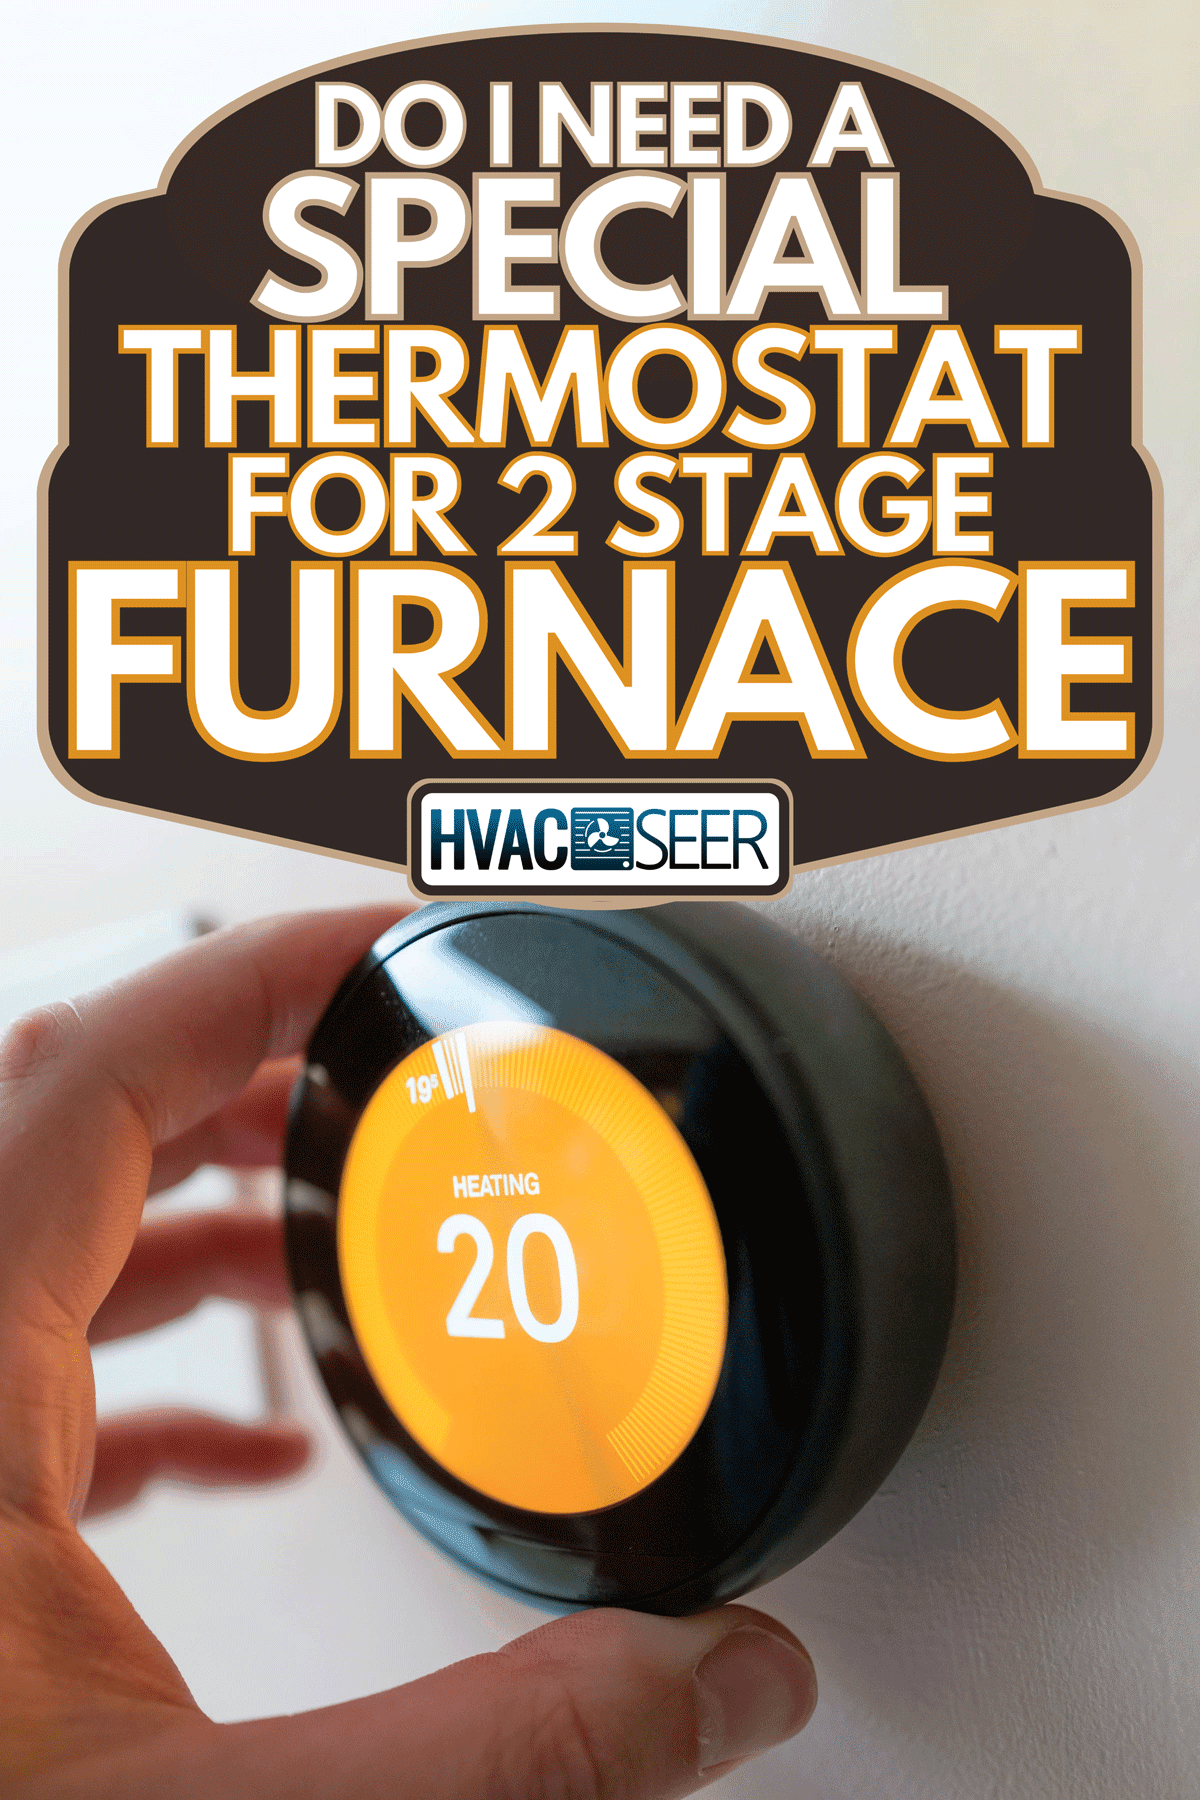 Man regulating heating temperature with a modern wireless thermostat, Do I Need A Special Thermostat For 2 Stage Furnace?